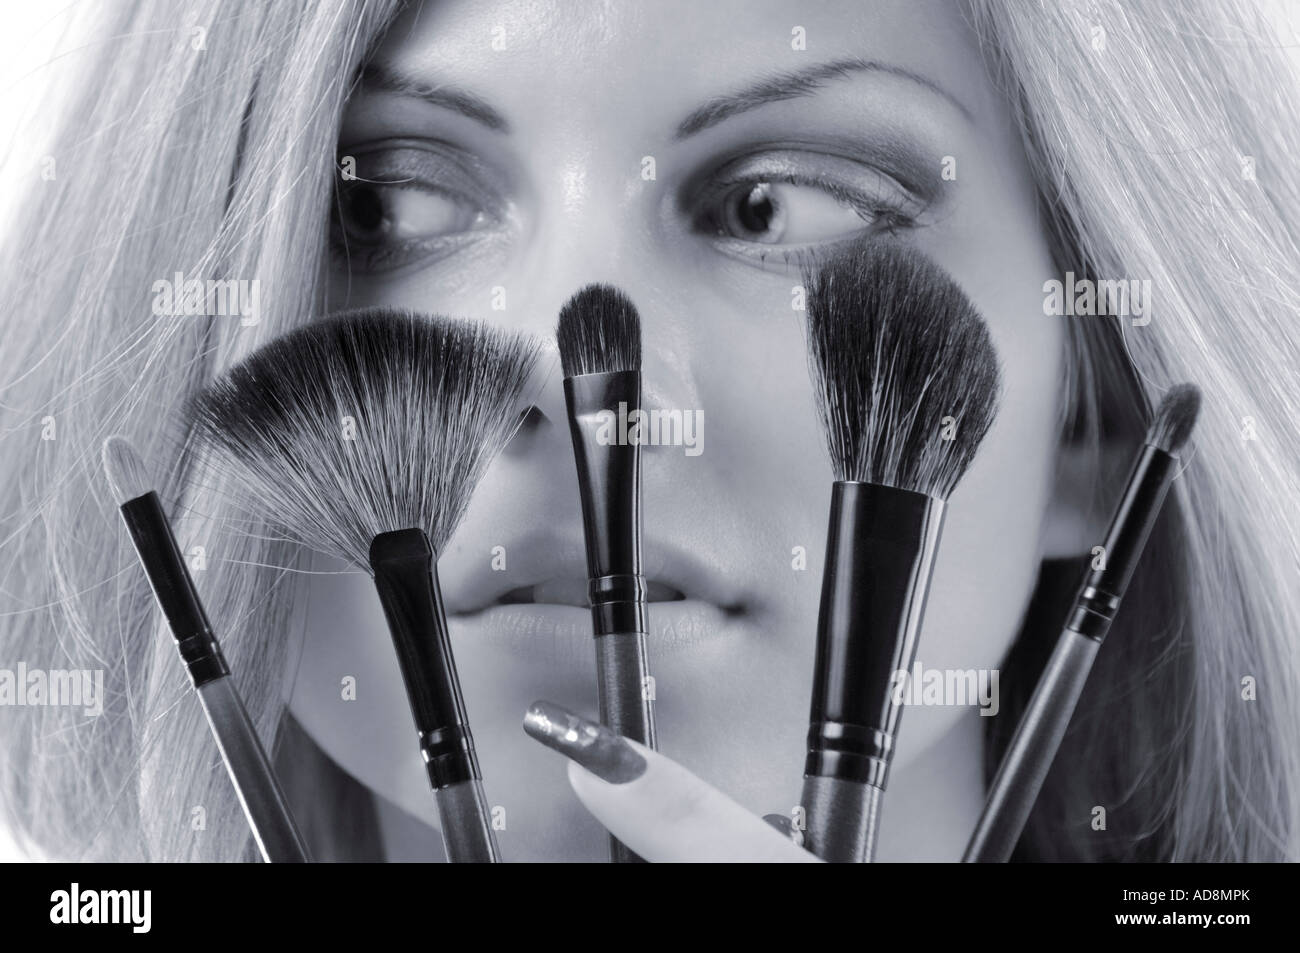 Beautiful young woman holding a set of make up brushes Stock Photo